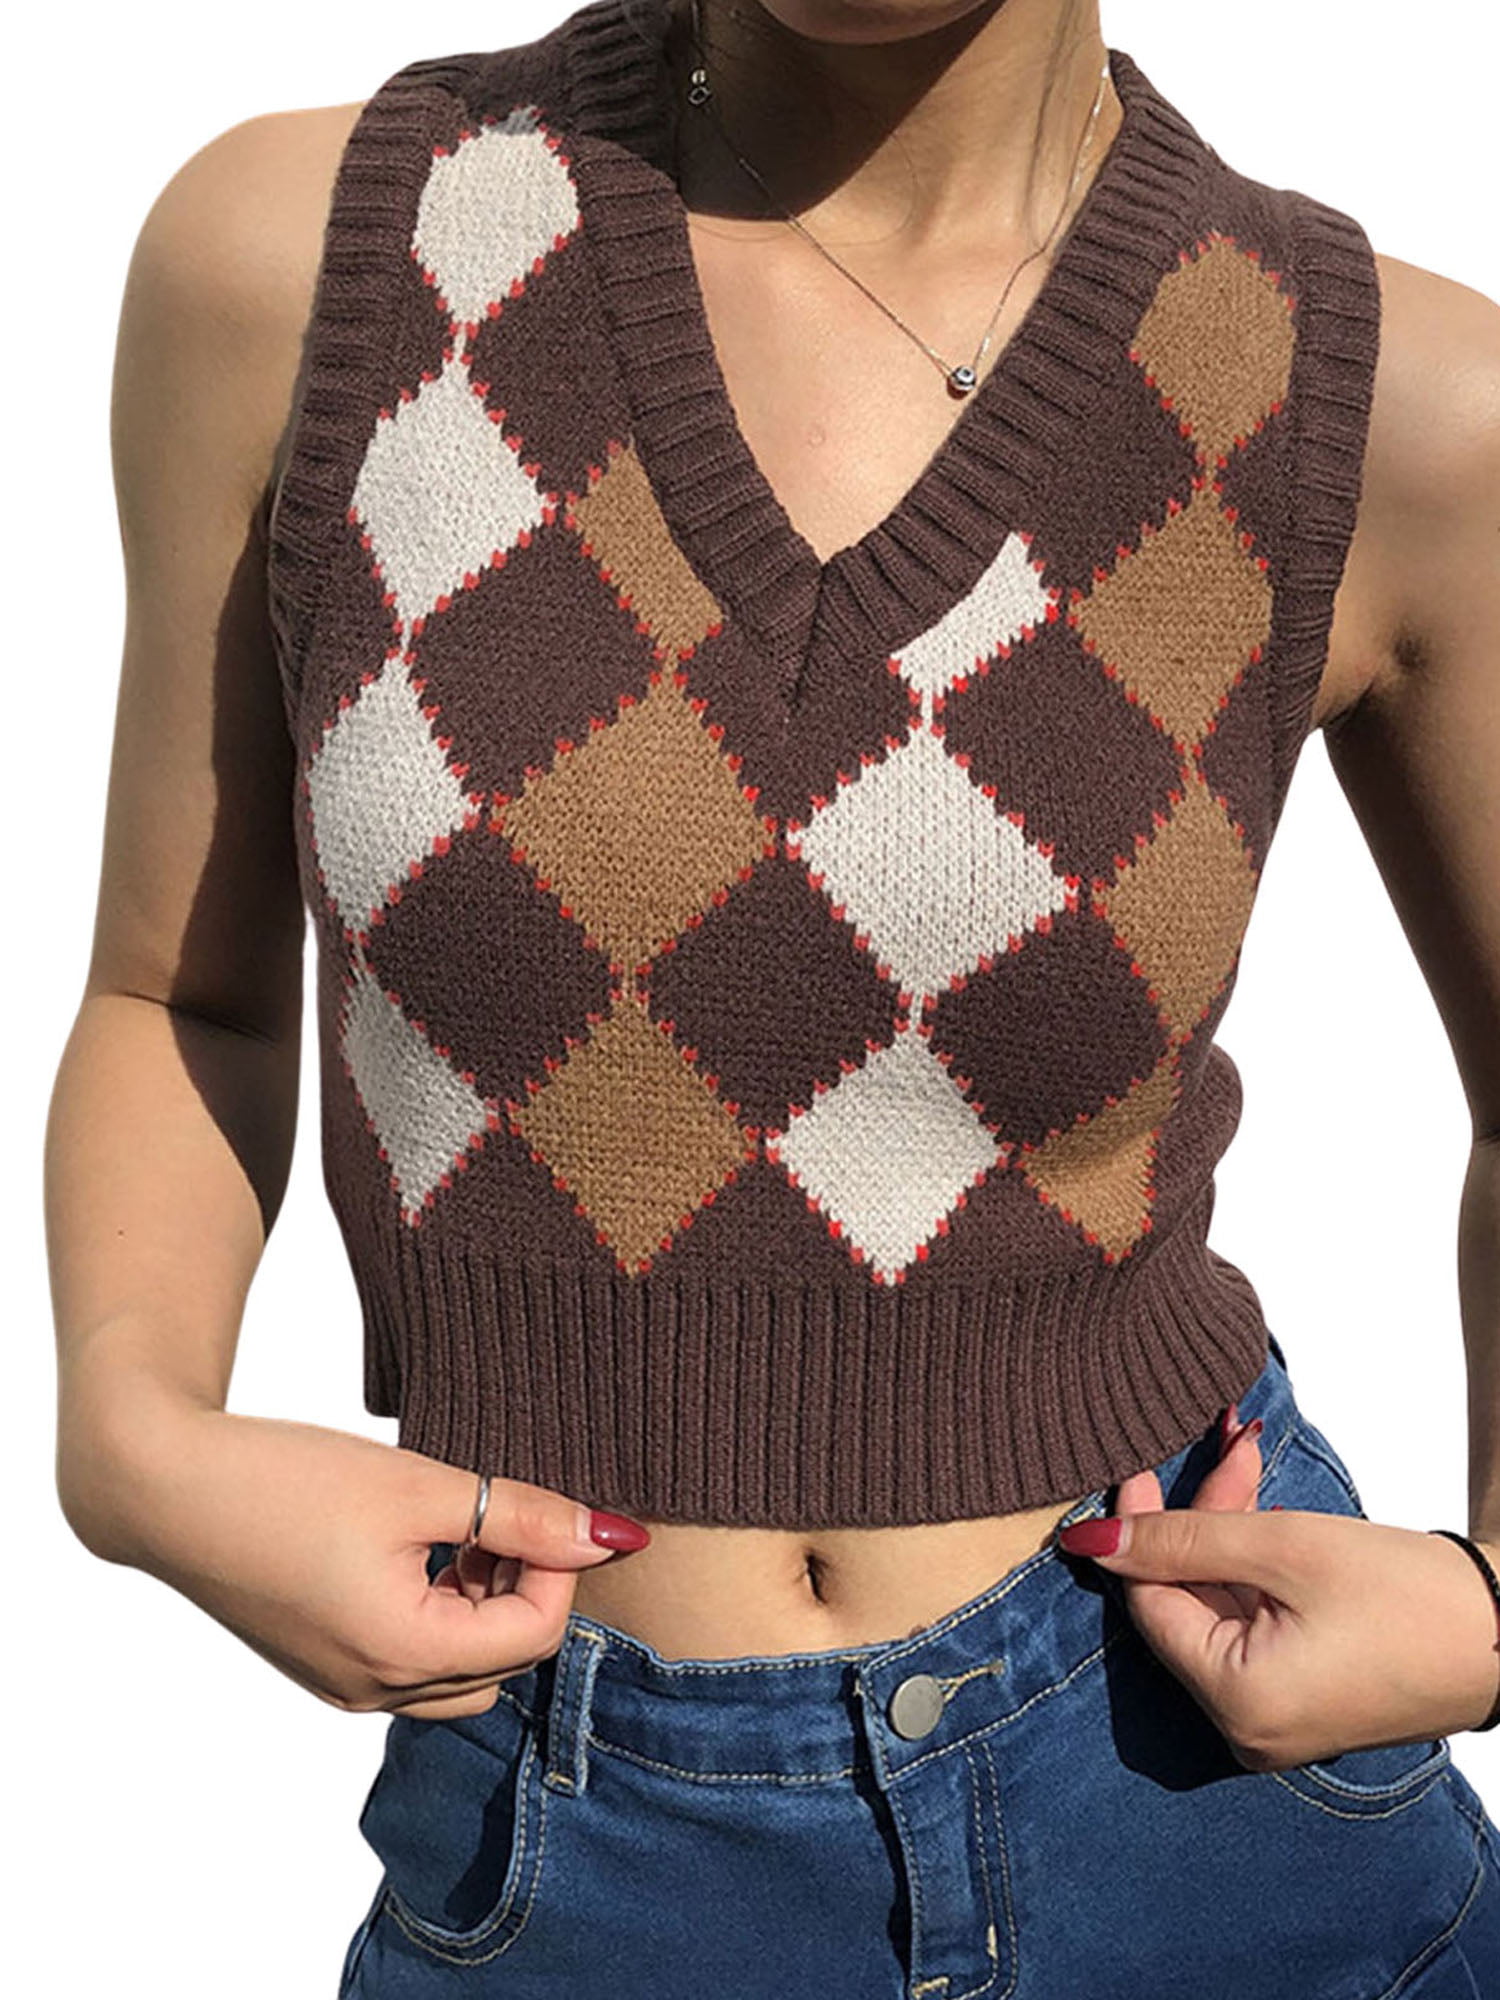 Plaid Knitted Sweater Vest Female Streetwear Preppy Style Vintage Striped Clothes V Neck Tank Top Y2K Knitwear